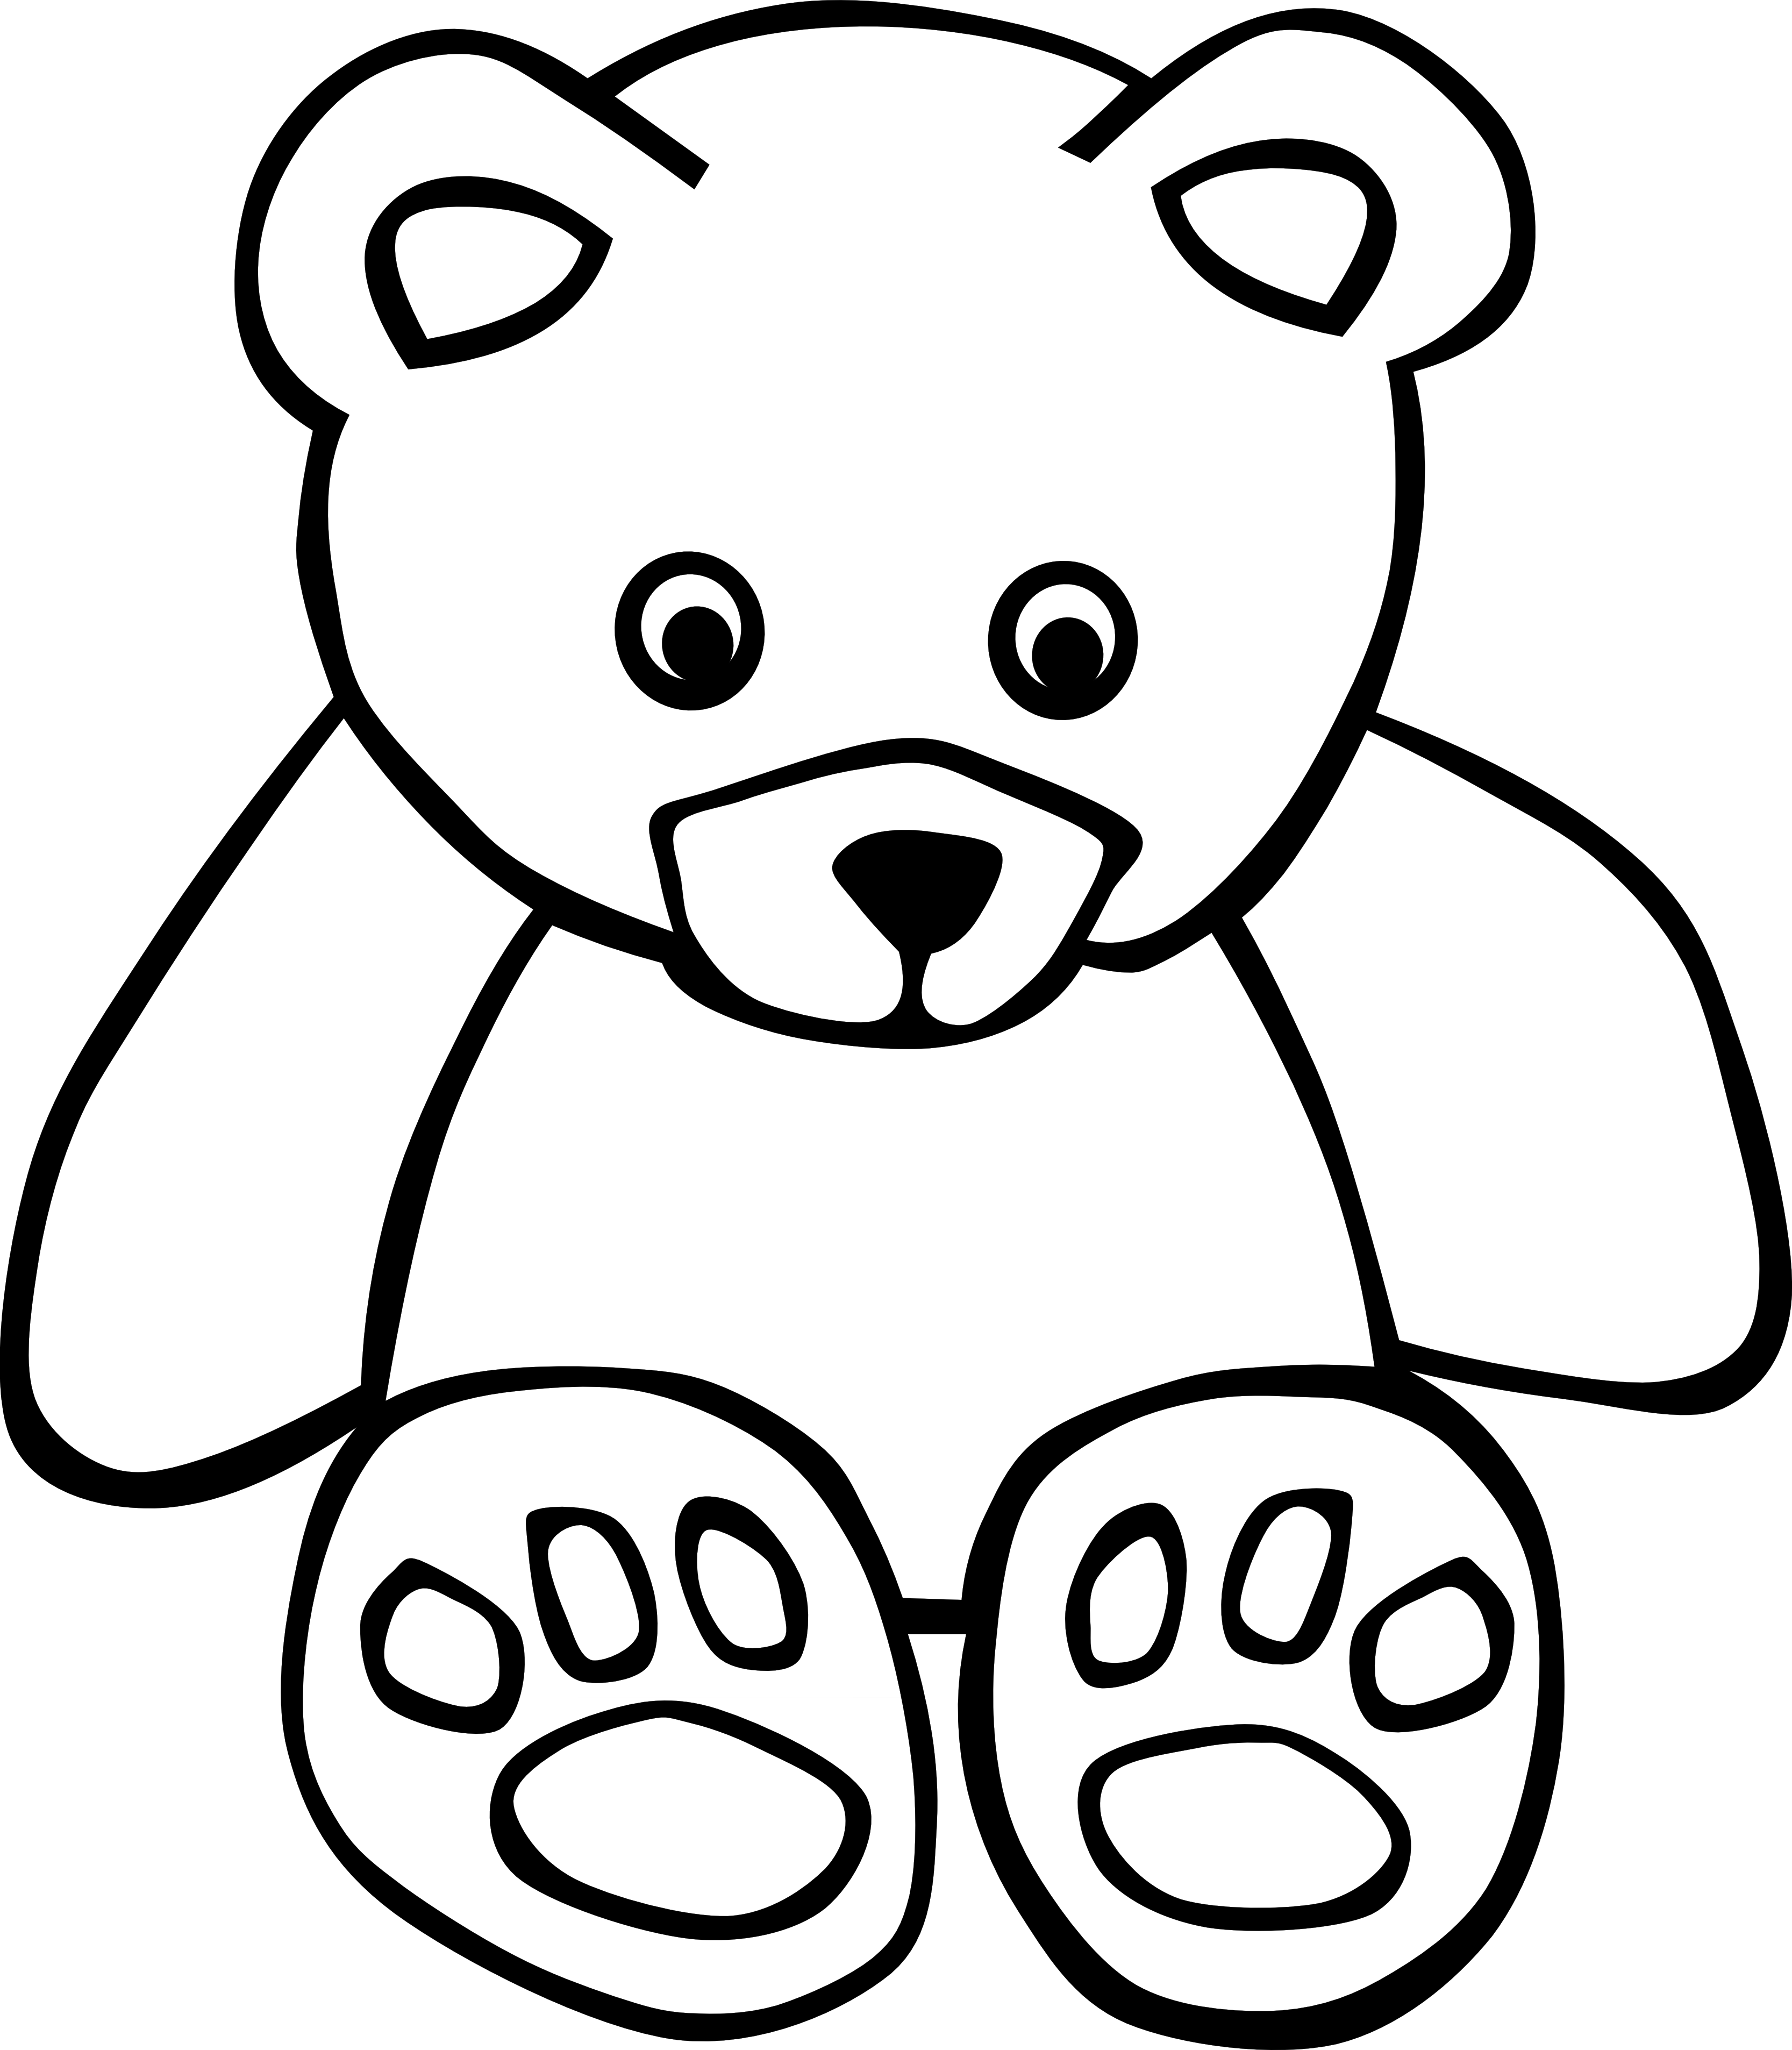 Baby Teddy Bear Clipart | Clipart library - Free Clipart Images